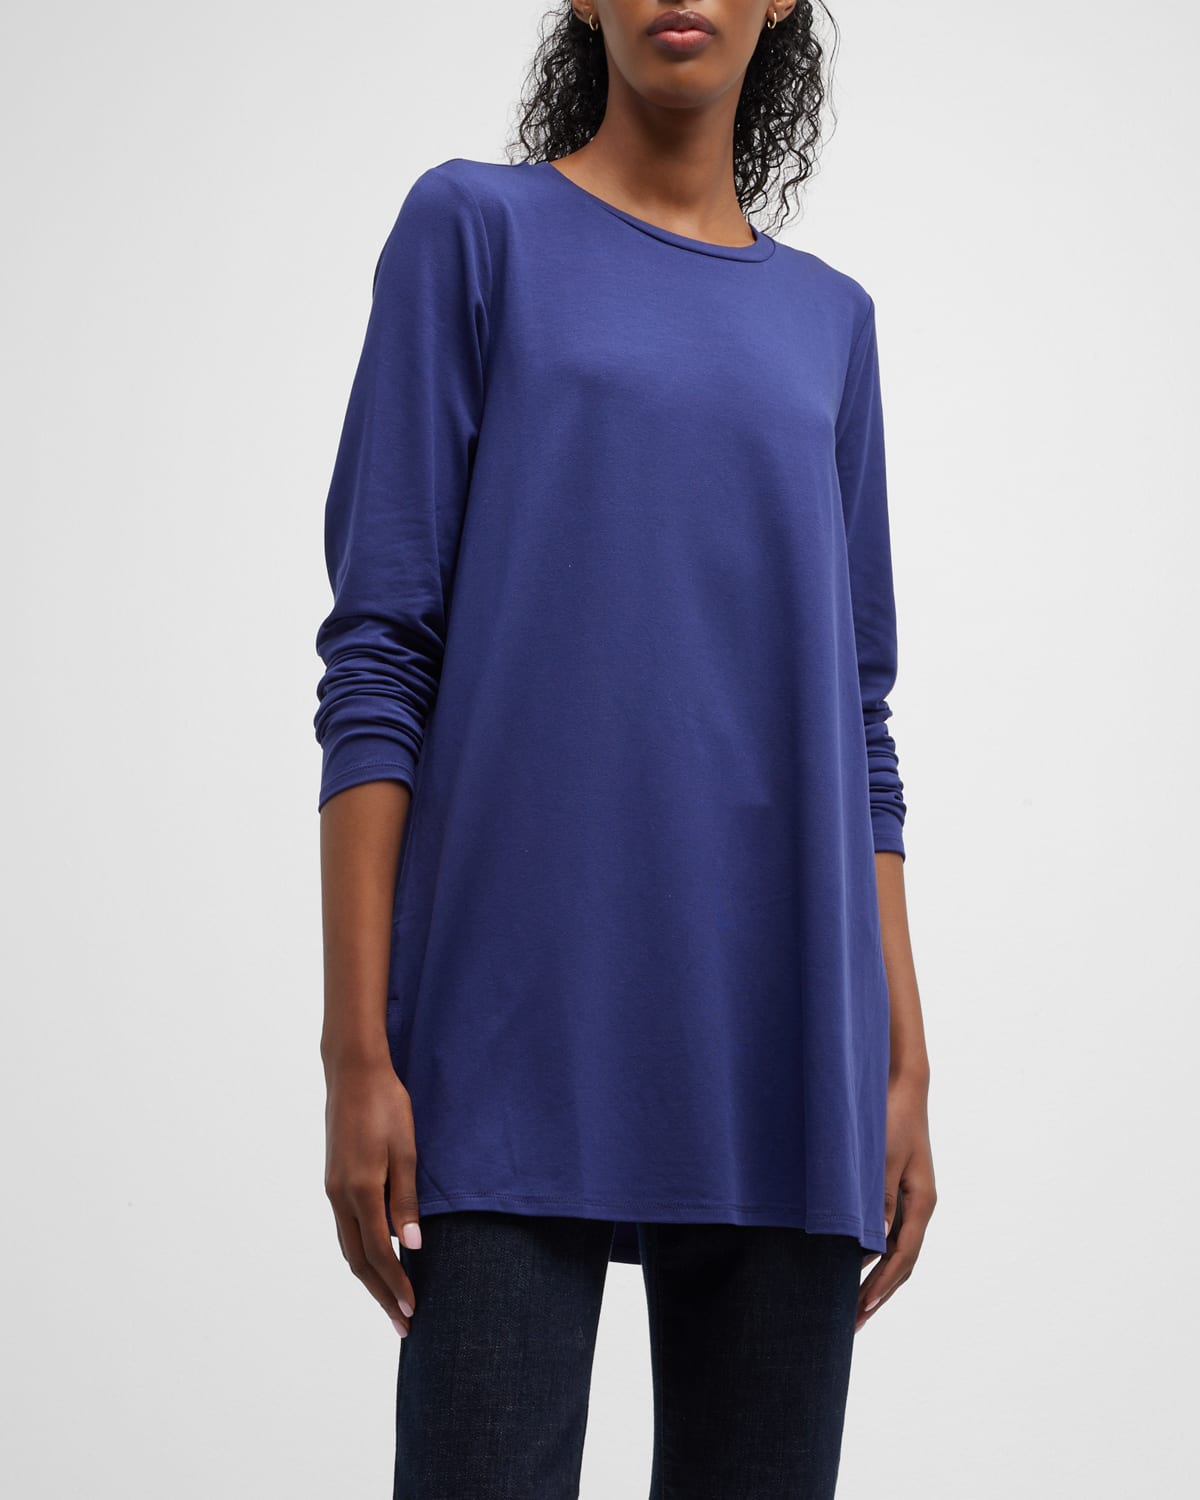 EILEEN FISHER LONG-SLEEVE CREWNECK STRETCH JERSEY TUNIC